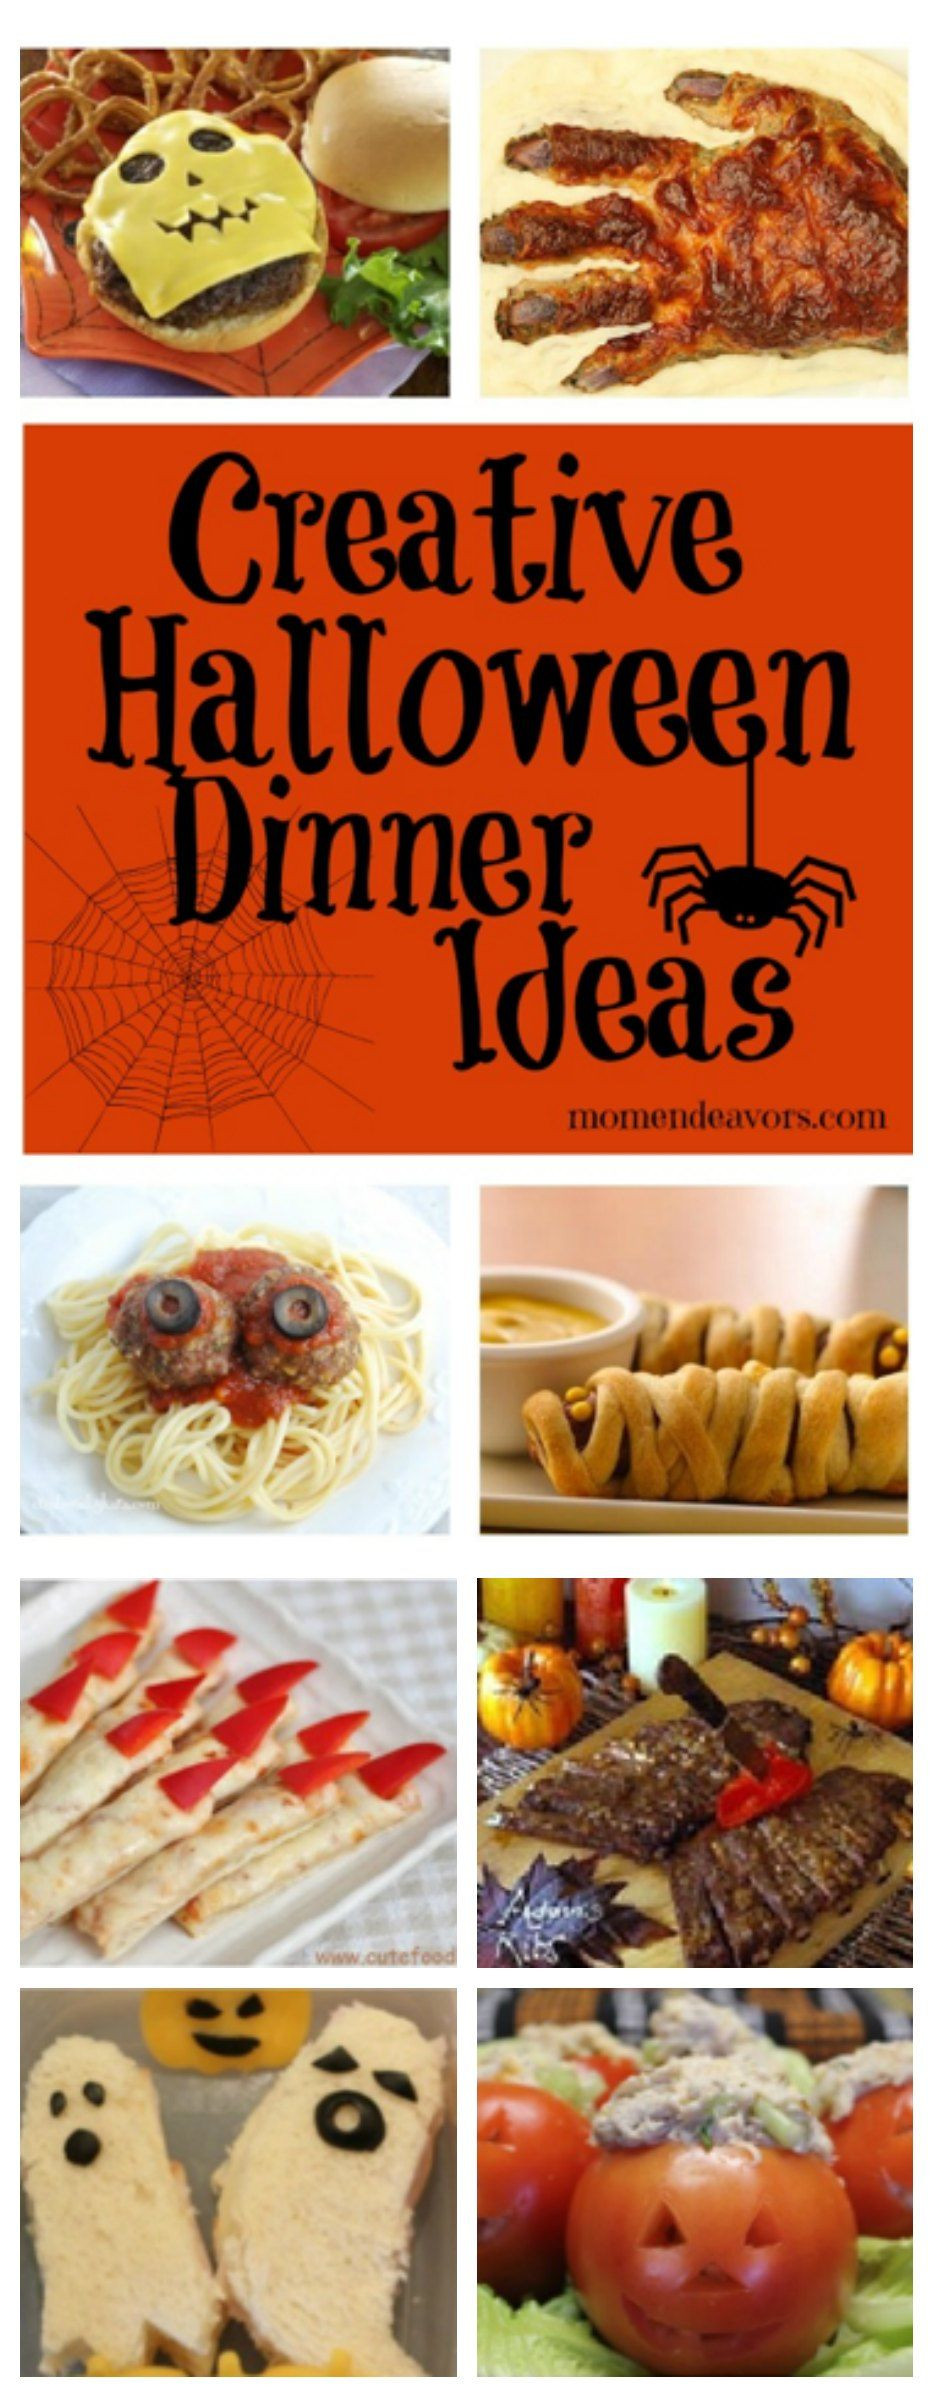 Halloween Side Dishes For Parties
 25 spooktacular Halloween dinner ideas & side dishes via